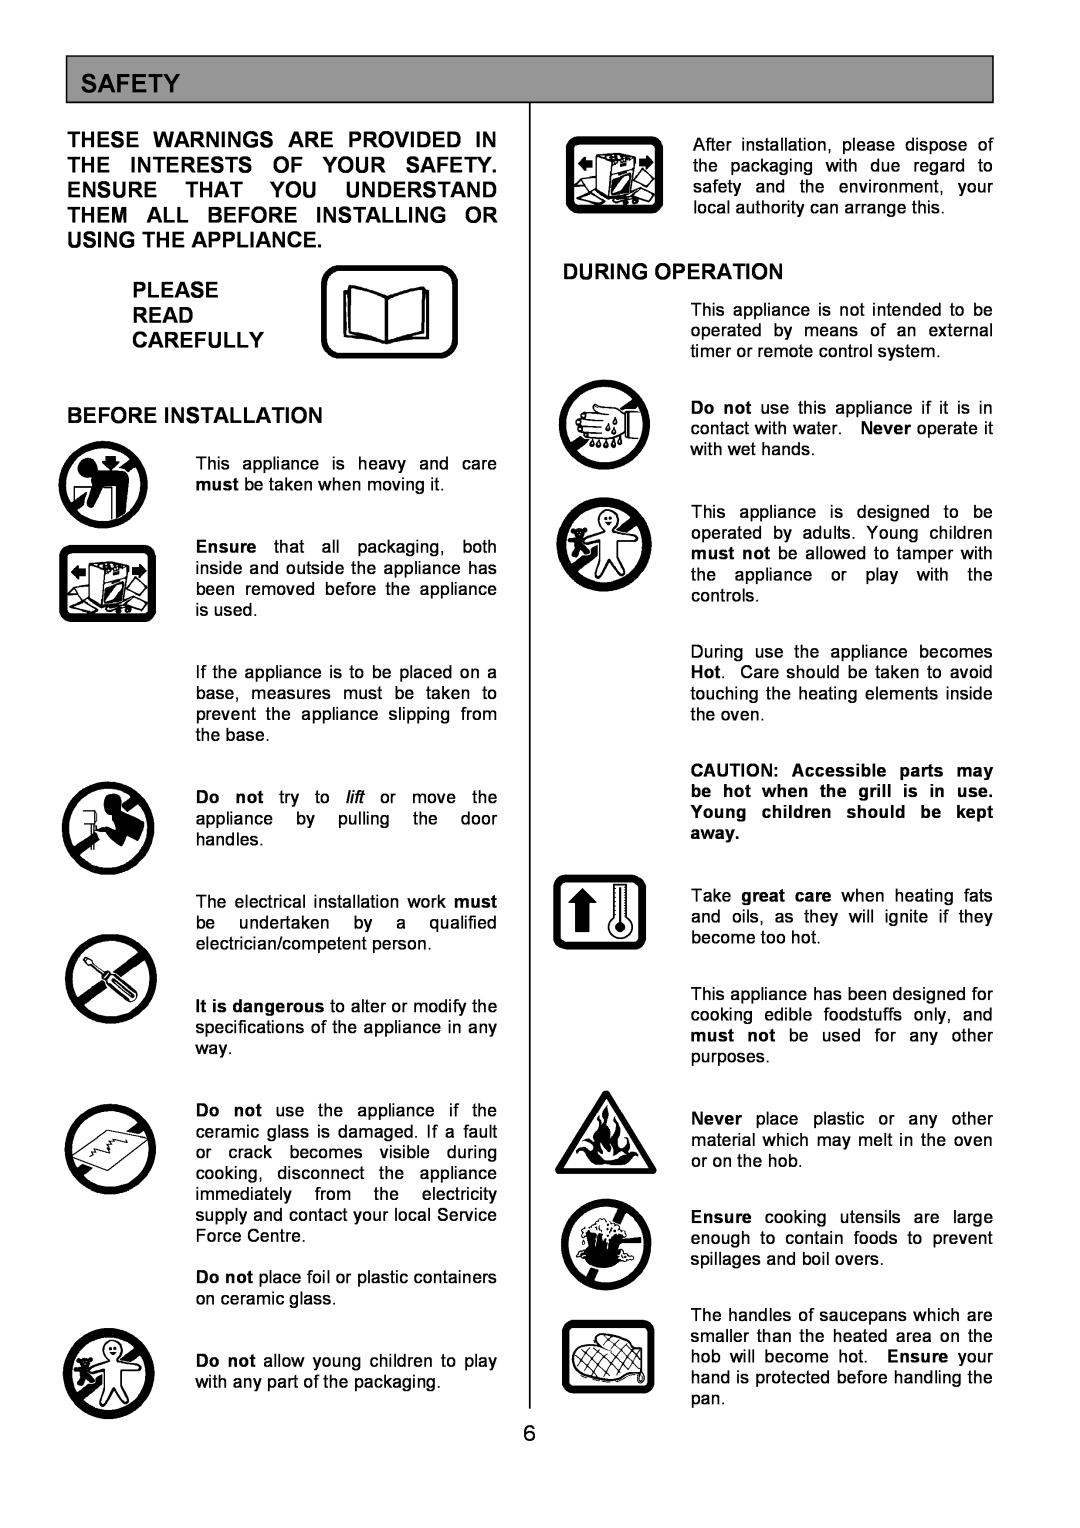 Tricity Bendix SE424 installation instructions Safety, Please Read Carefully Before Installation, During Operation 